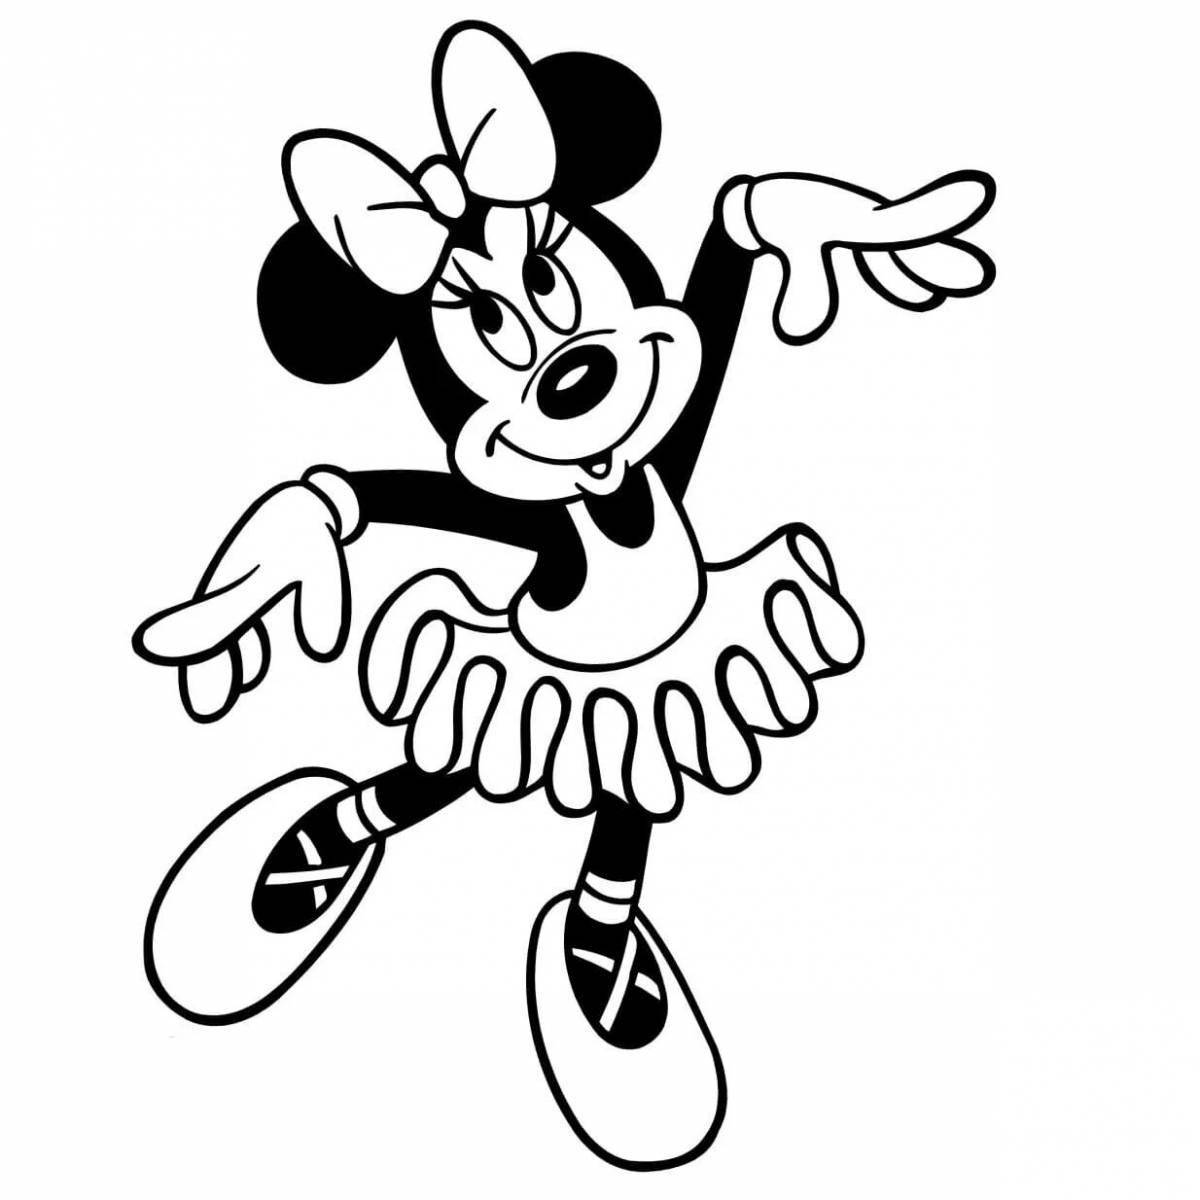 Exciting minnie mouse coloring book